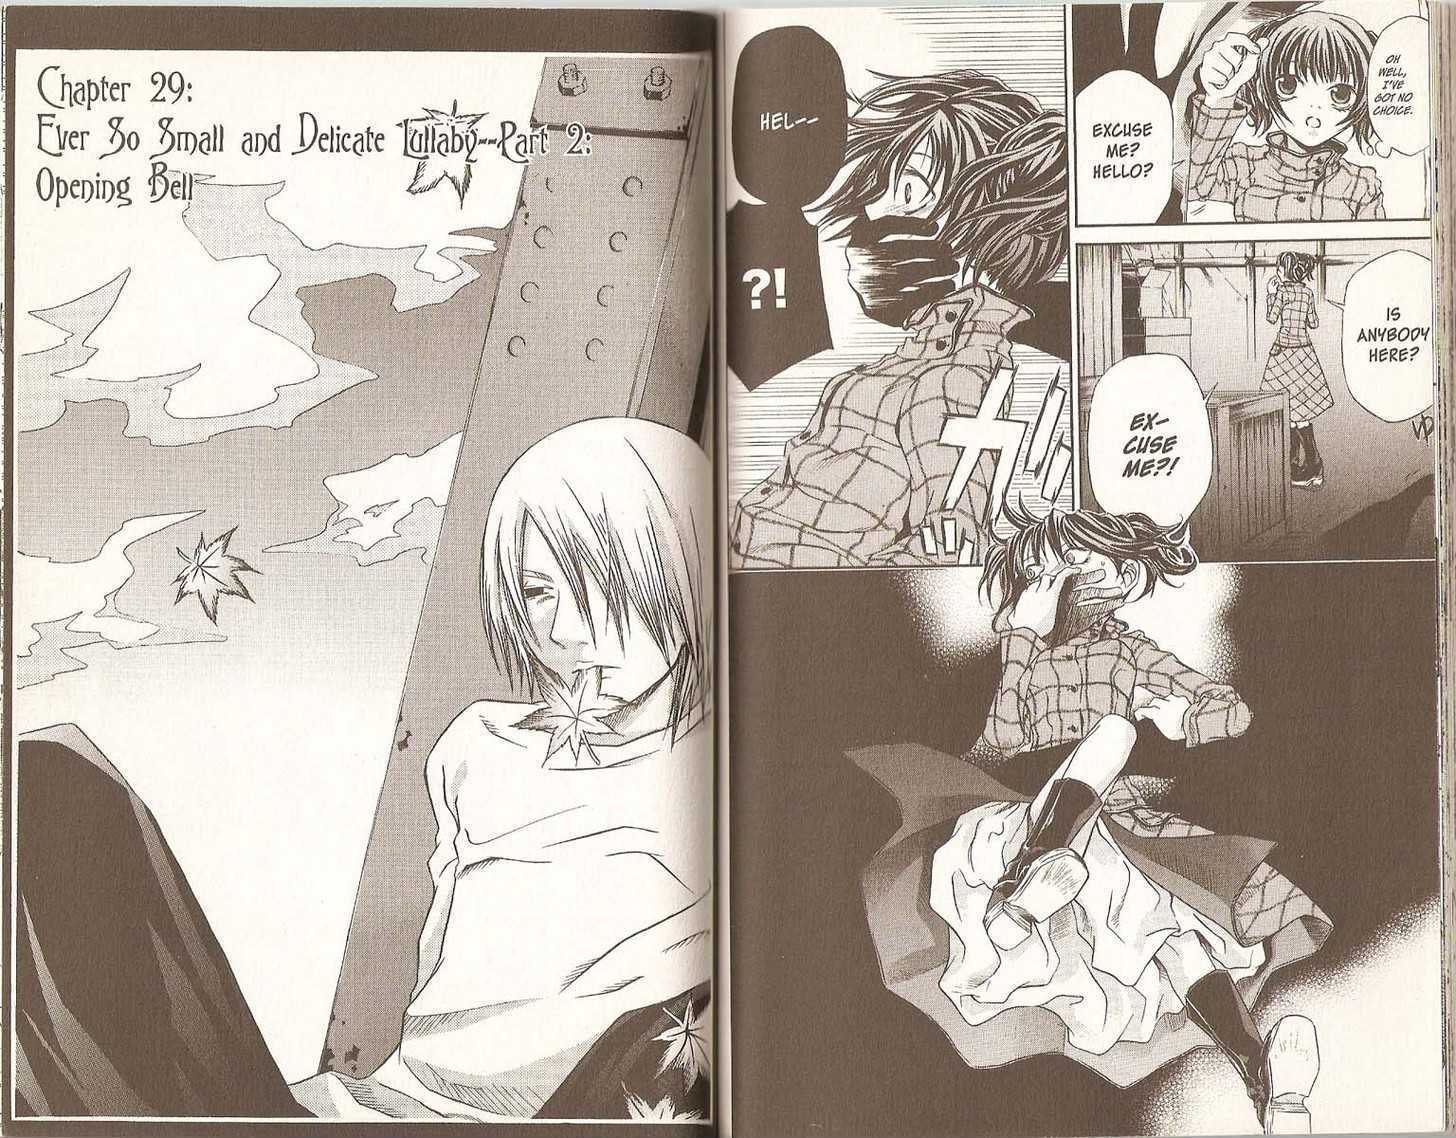 Hatenkou Yuugi Vol.4 Chapter 29 : Ever So Small And Delicate Lullaby—Part 2: Opening Bell - Picture 1